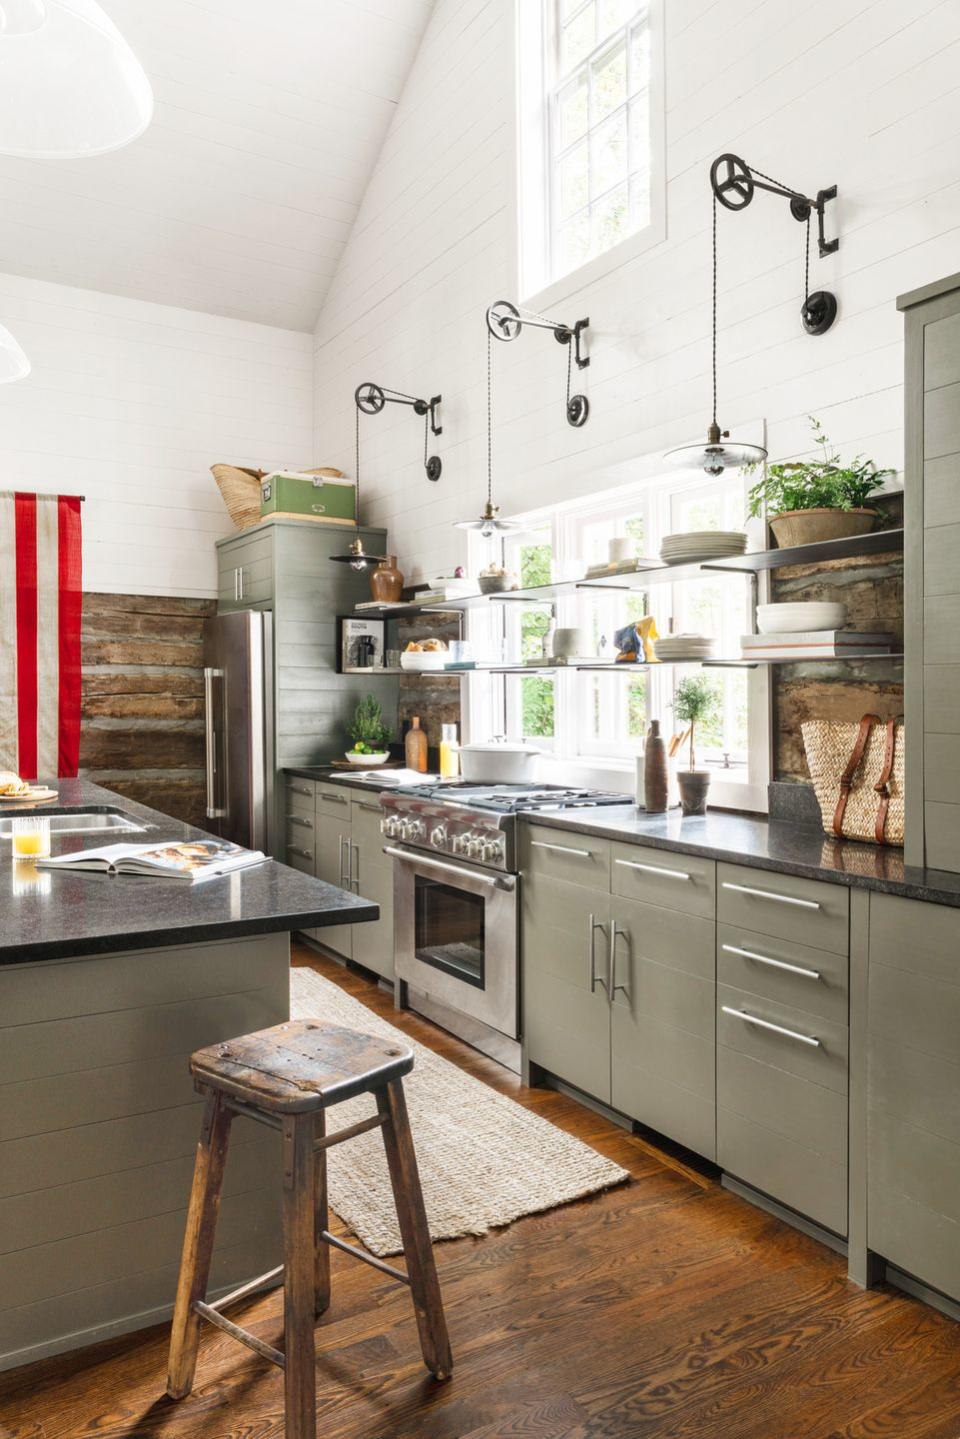 olive green cabinets in a kitchen with honed black granite countertops and lots of windows